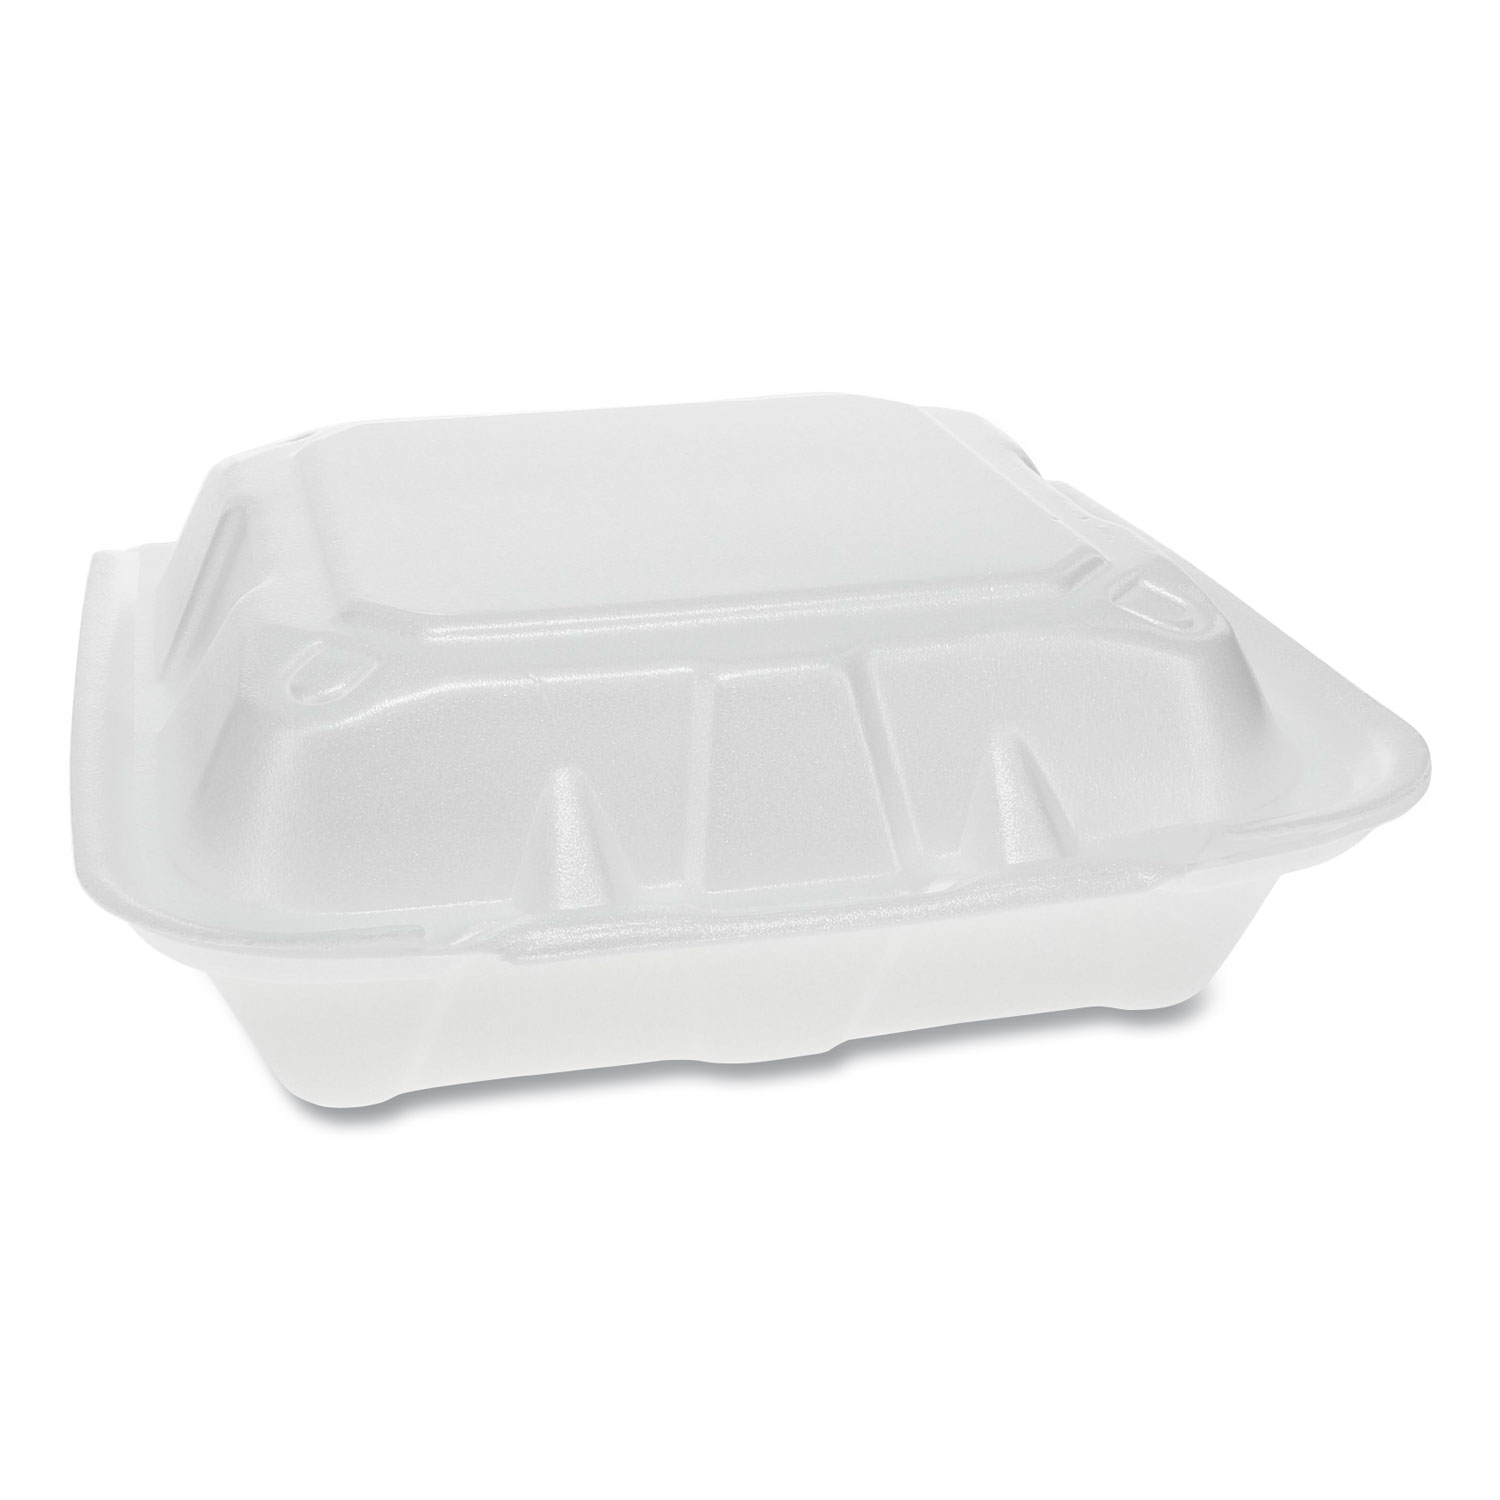  Pactiv YTD188030000 Foam Hinged Lid Containers, Dual Tab Lock, 8.42 x 8.15 x 3, 3-Compartment, White, 150/Carton (PCTYTD188030000) 